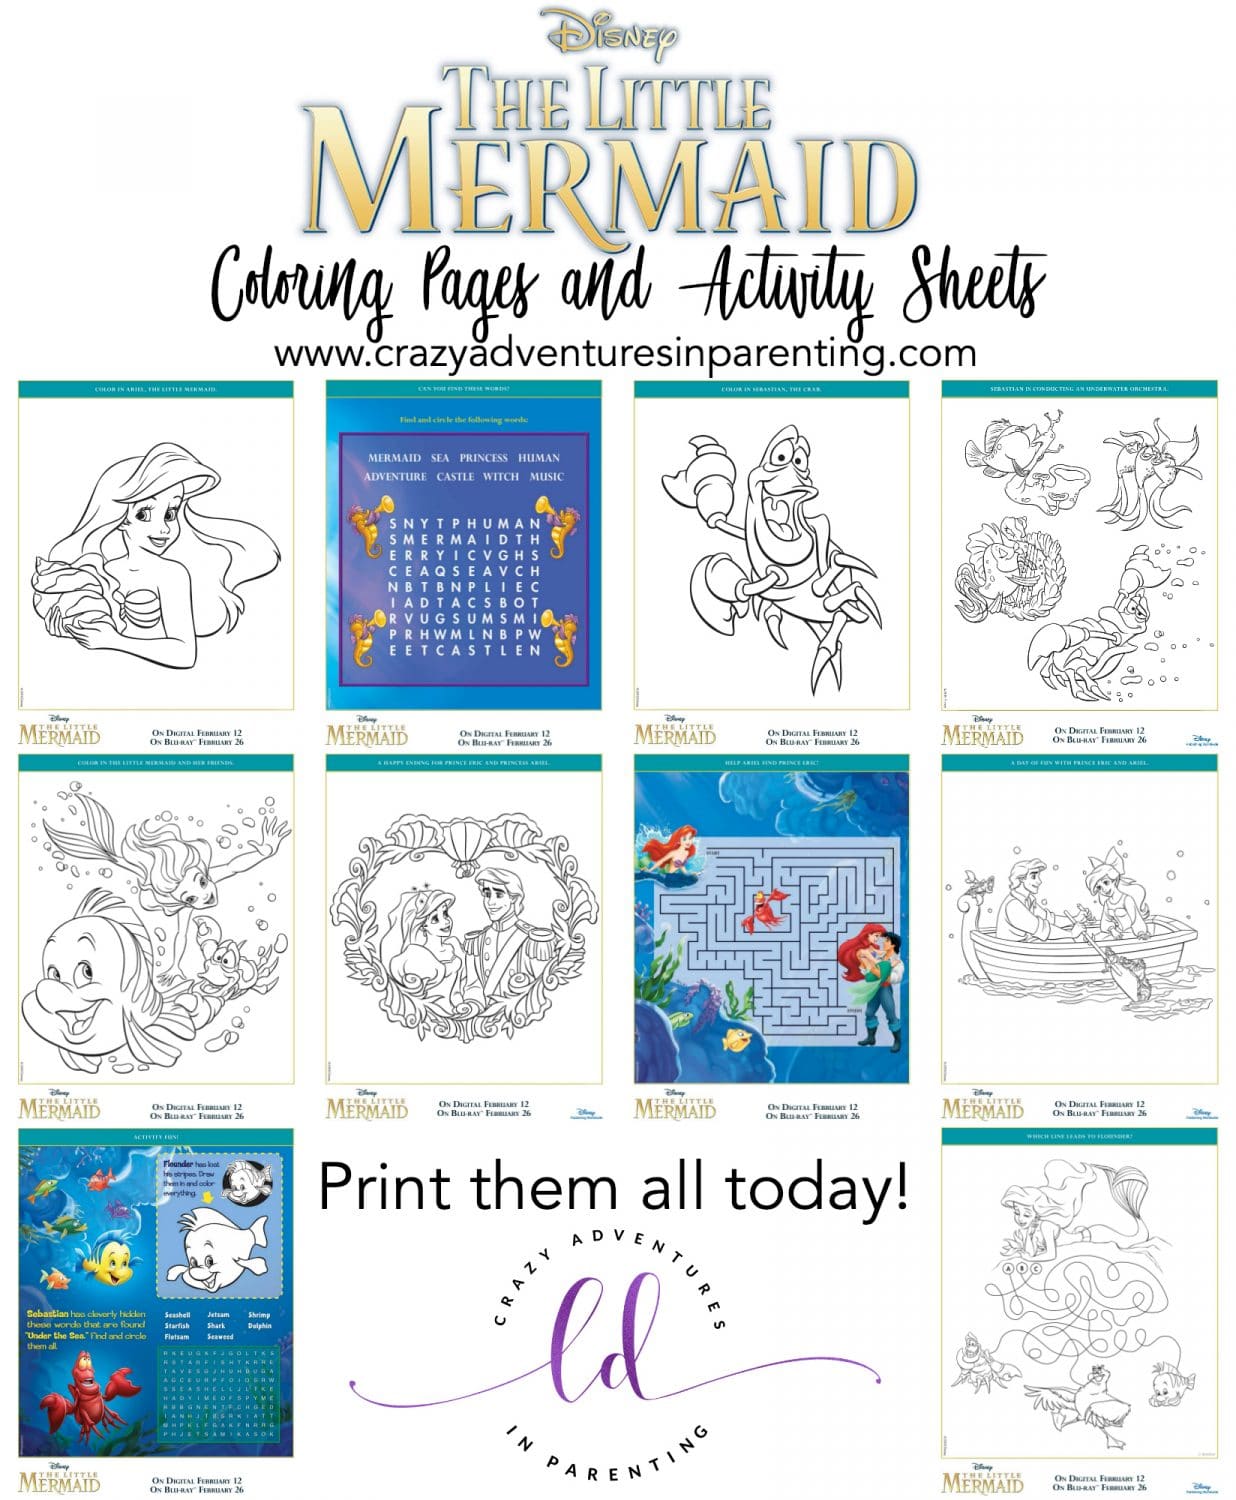 The Little Mermaid Coloring Pages and Activity Sheets